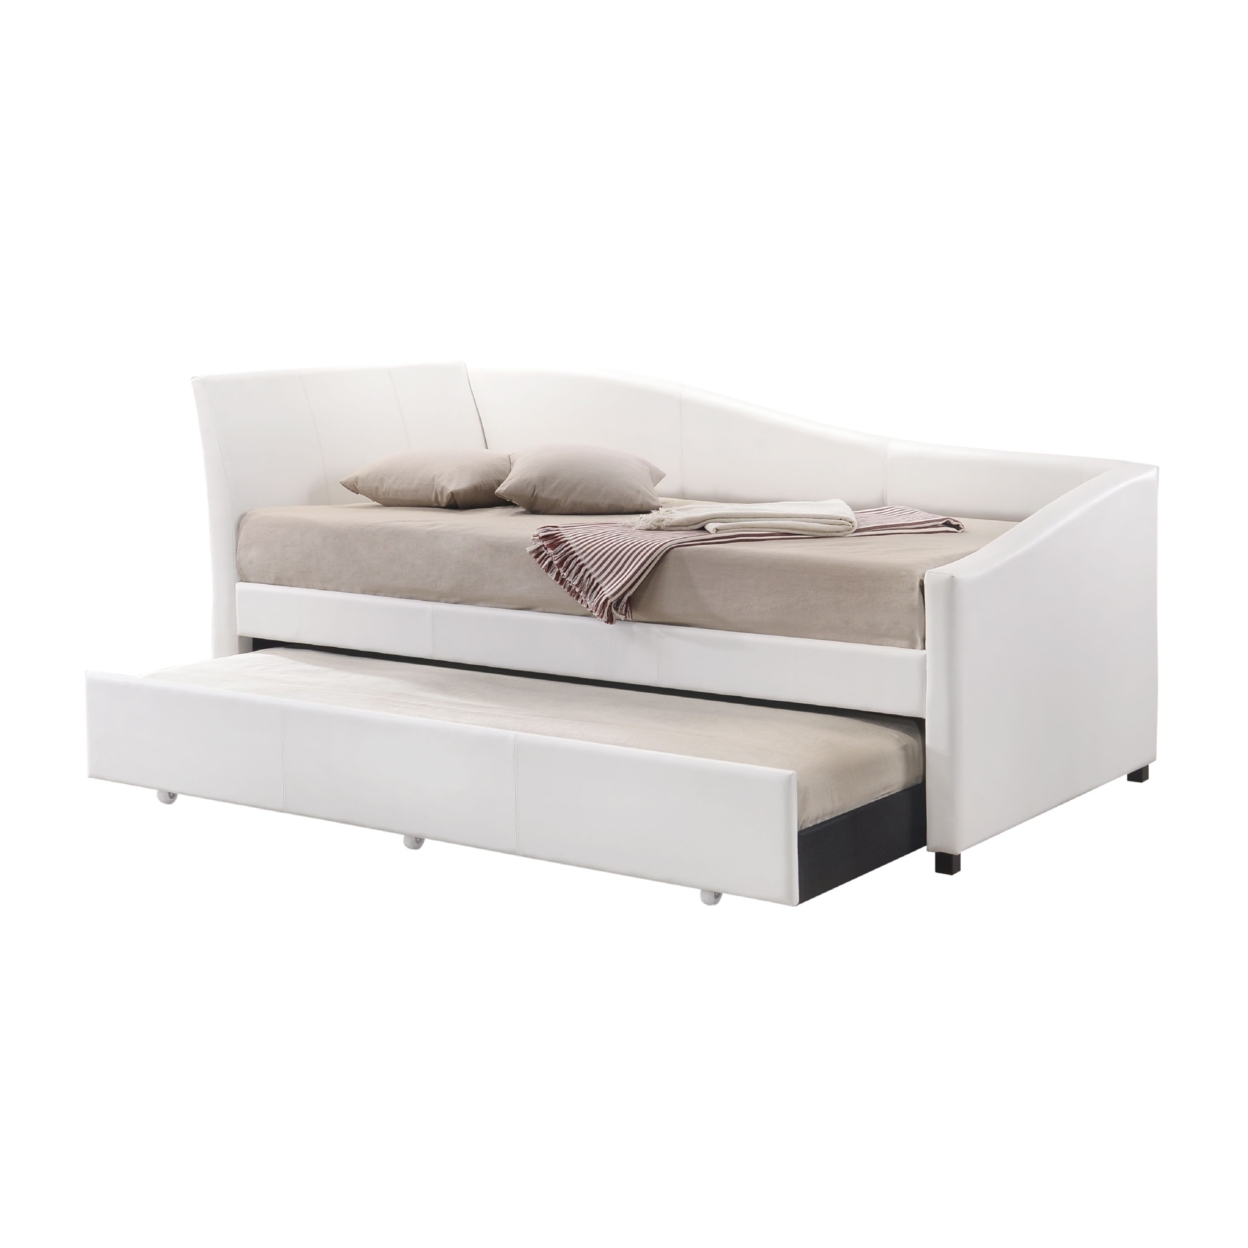 Leatherette Twin Size Daybed And Trundle With Sloped Back, White- Saltoro Sherpi